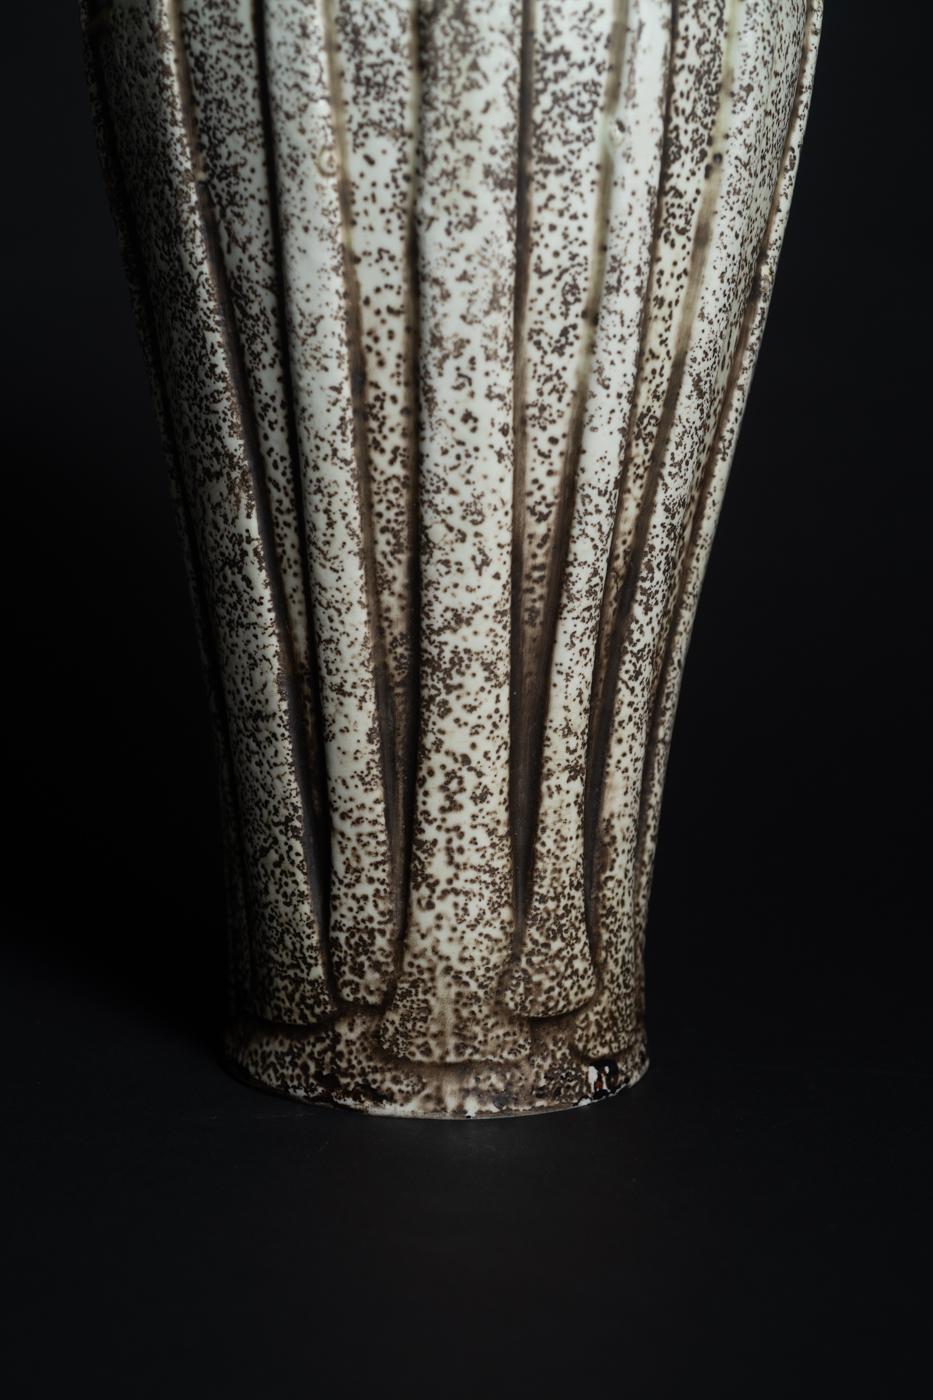 Vase with Stylized Trees by Paul Dachsel for Ernst Whaliss co., Turn-Teplitz 3